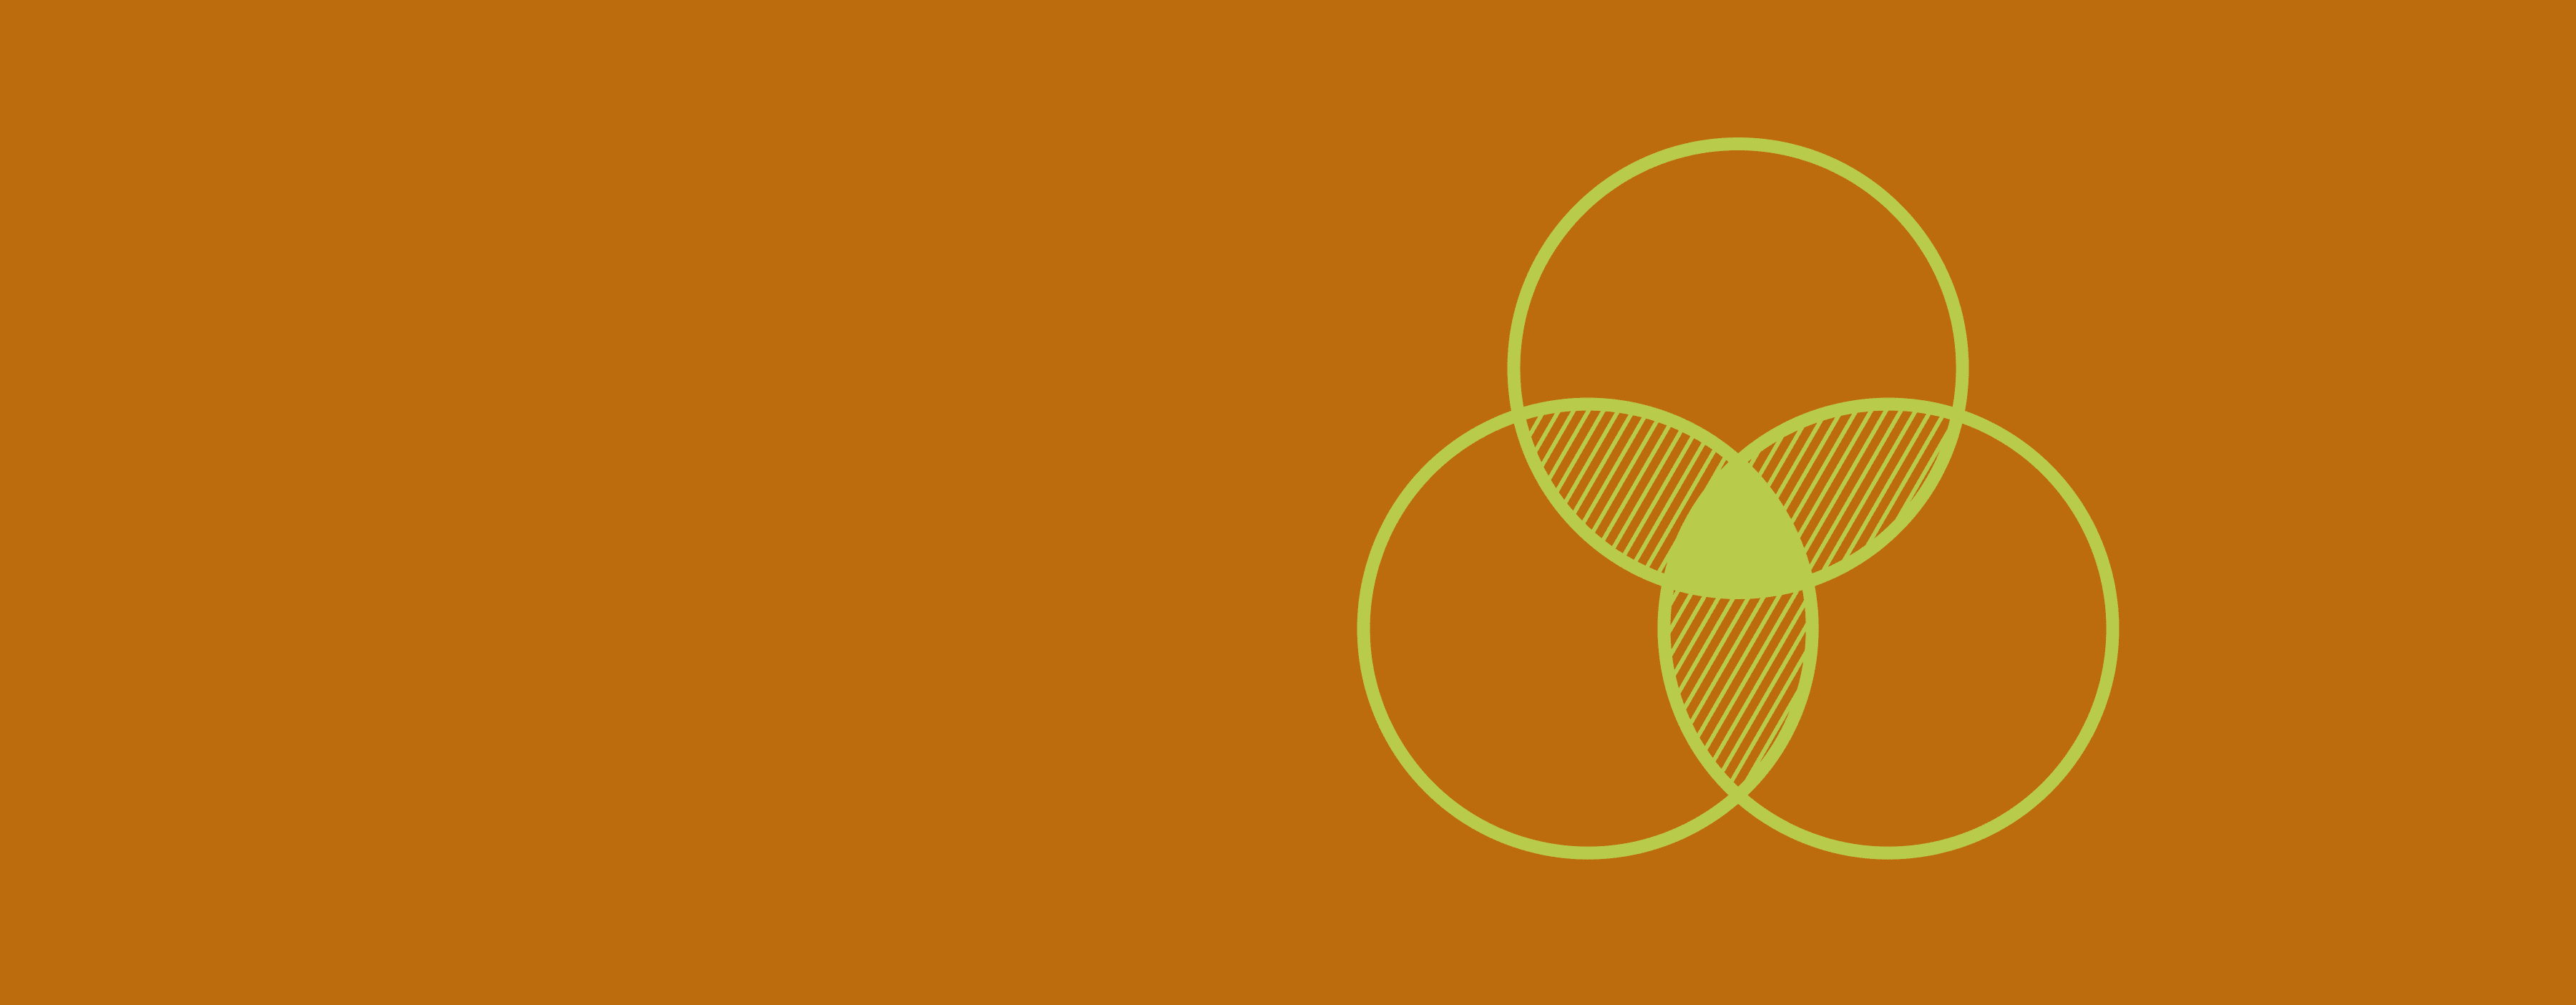 A diagram of three overlapping circles